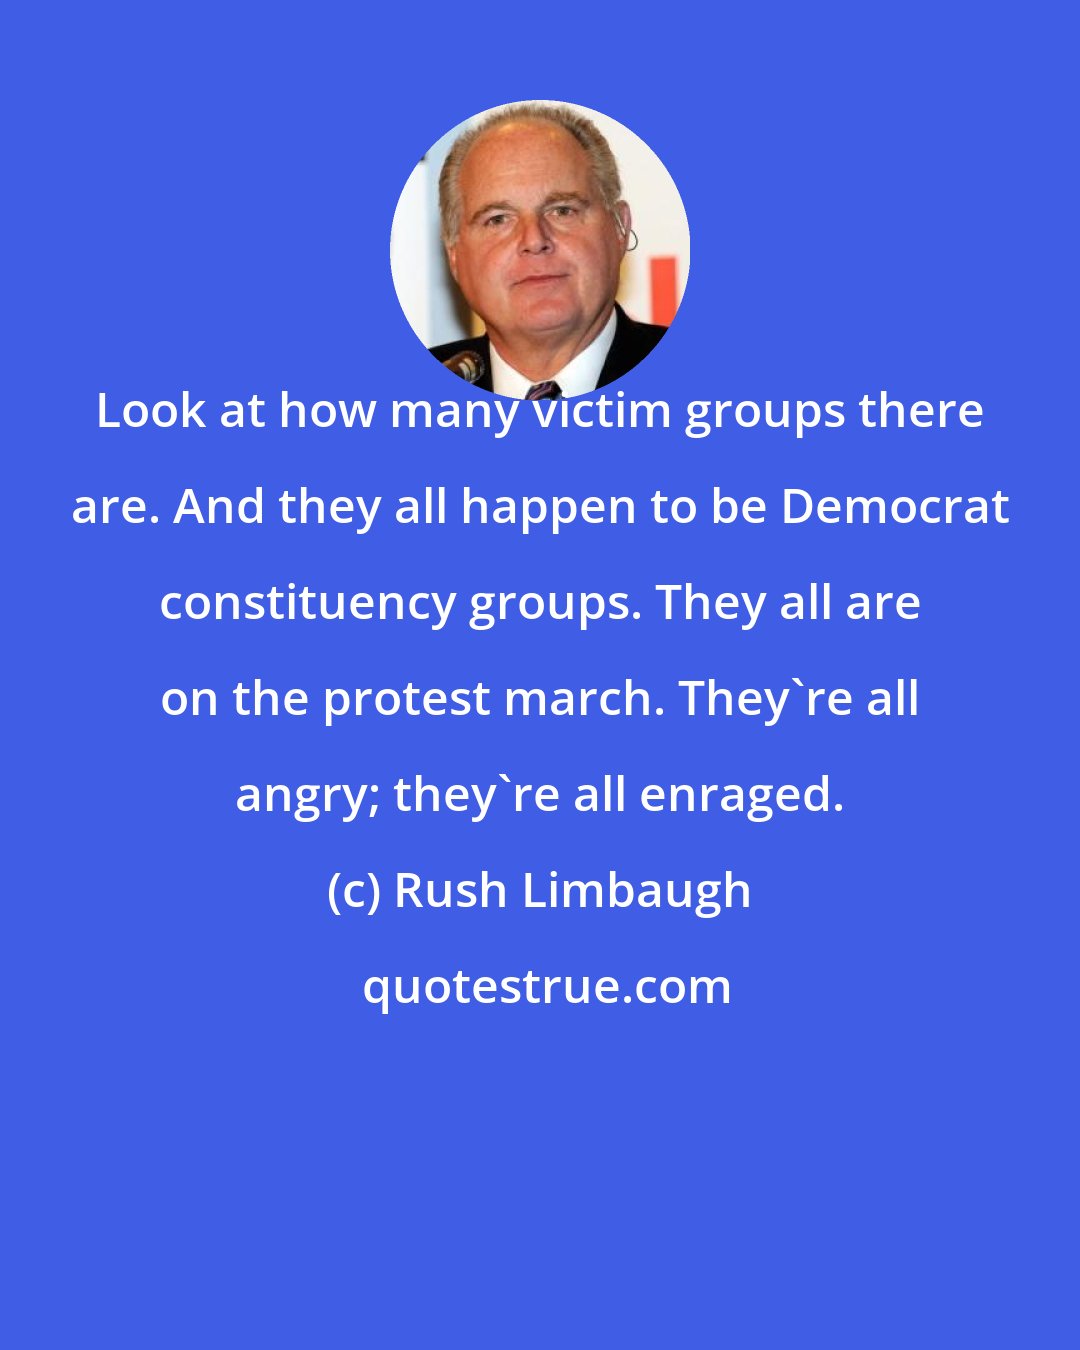 Rush Limbaugh: Look at how many victim groups there are. And they all happen to be Democrat constituency groups. They all are on the protest march. They're all angry; they're all enraged.